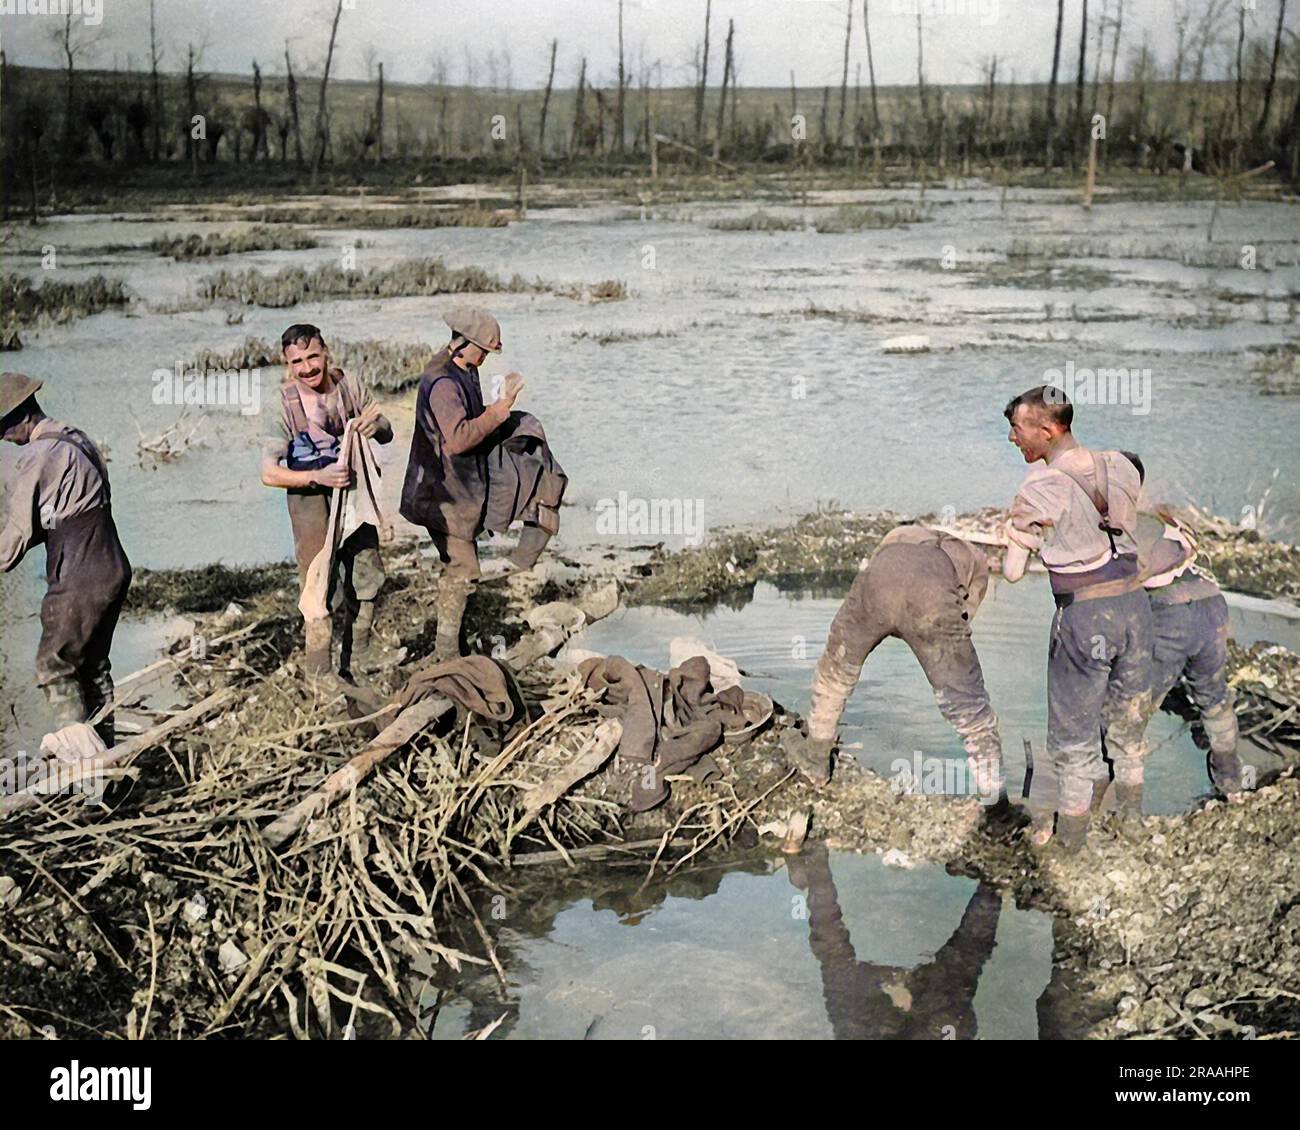 British soldiers washing and cleaning up in a swamp on the Somme, Western Front, during World War One.     Date: circa 1916 Stock Photo